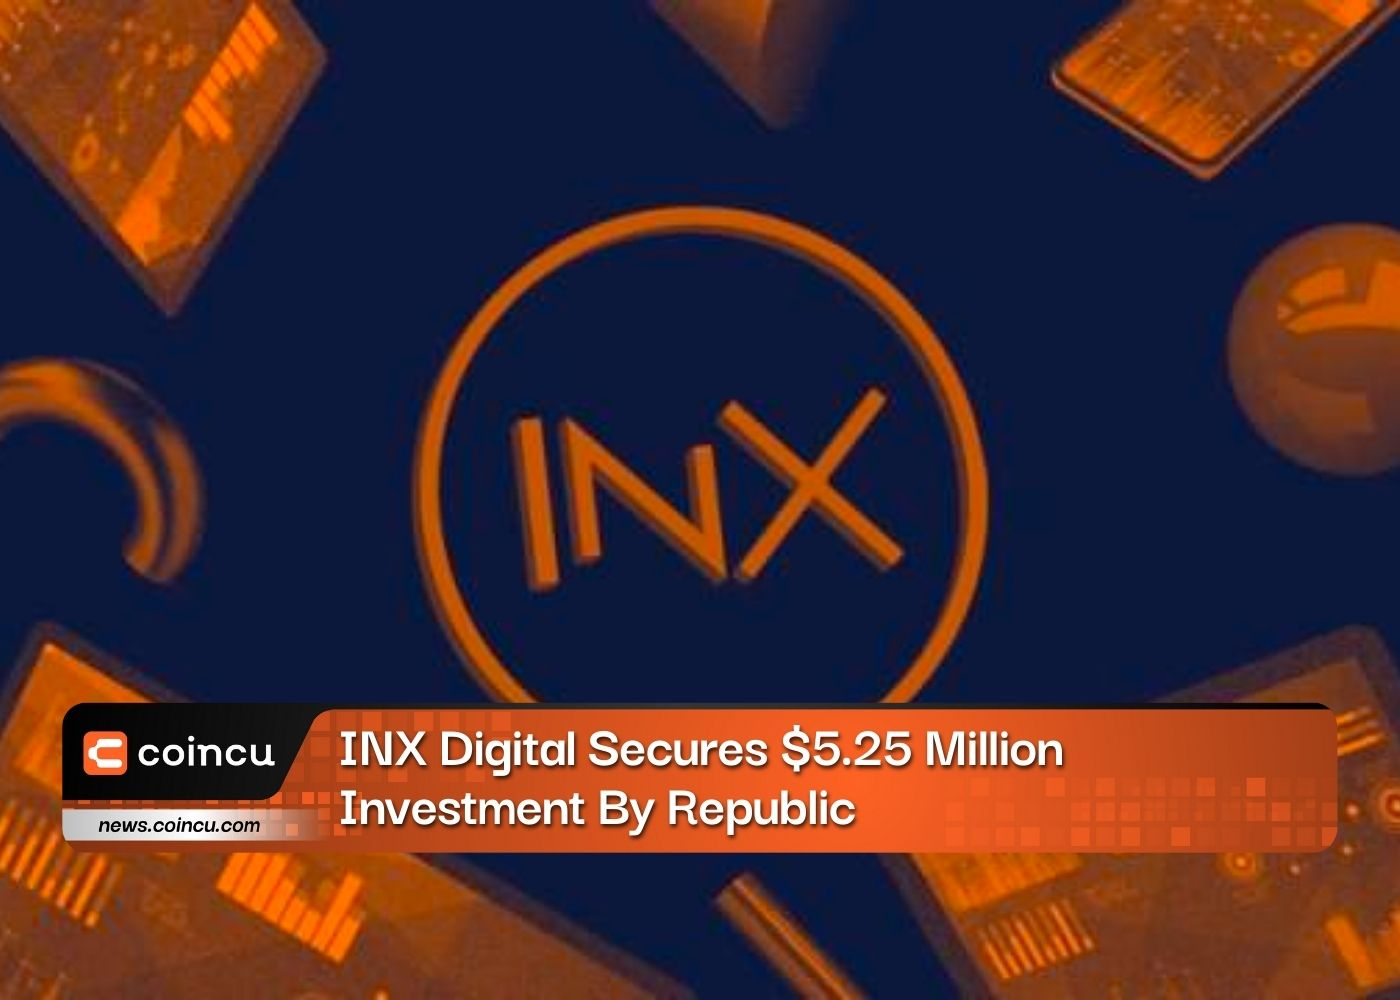 INX Digital Secures $5.25 Million Investment By Republic